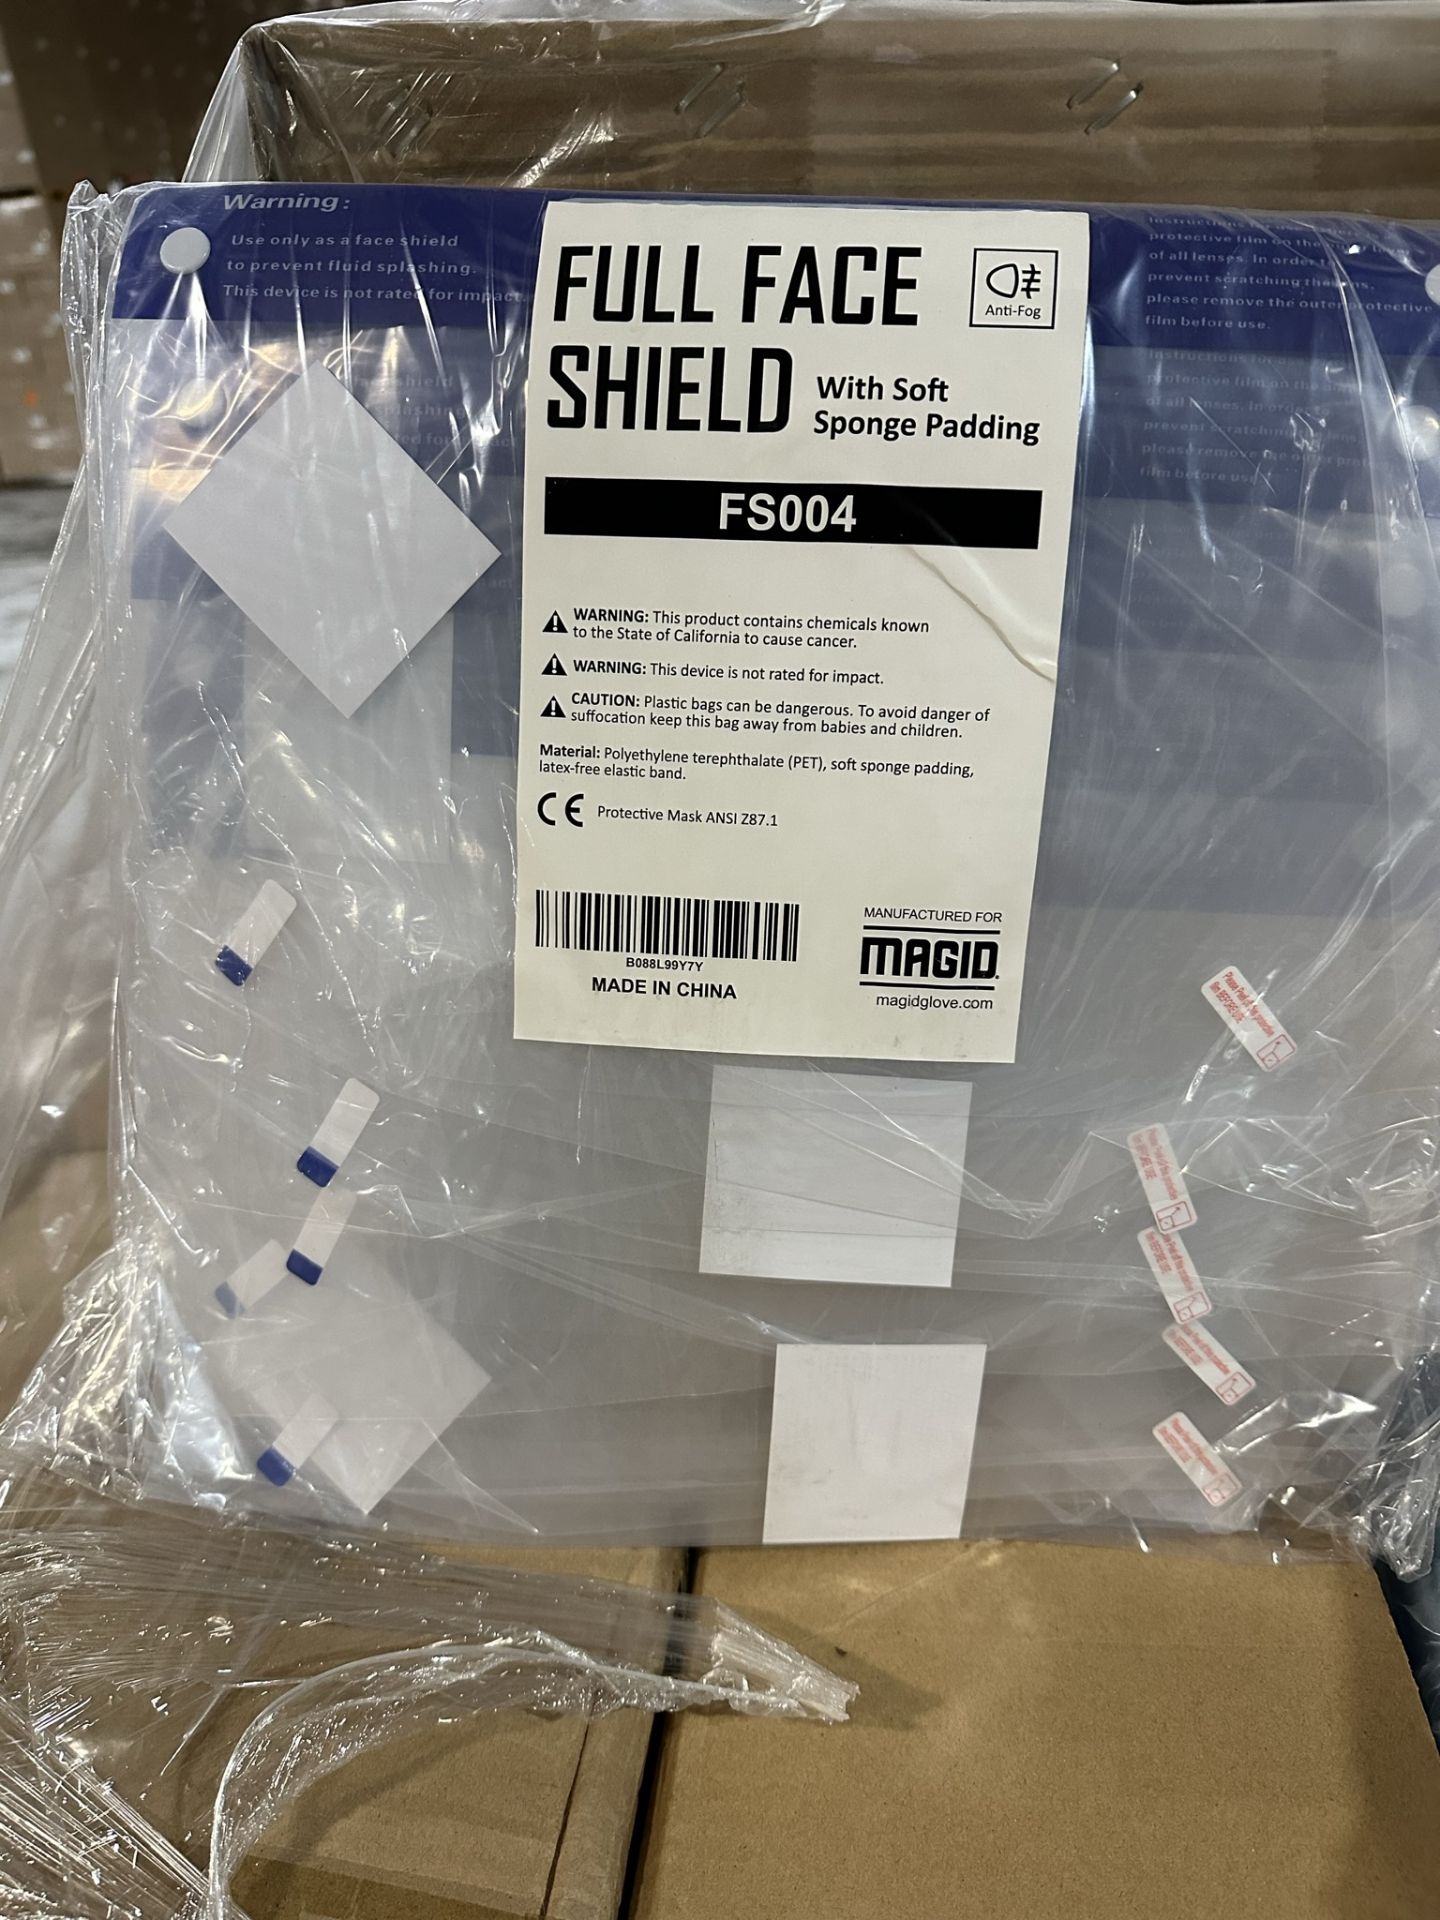 Lot of (95) Cases of Magid Full Face Shield with Soft Sponge Padding - Image 2 of 2